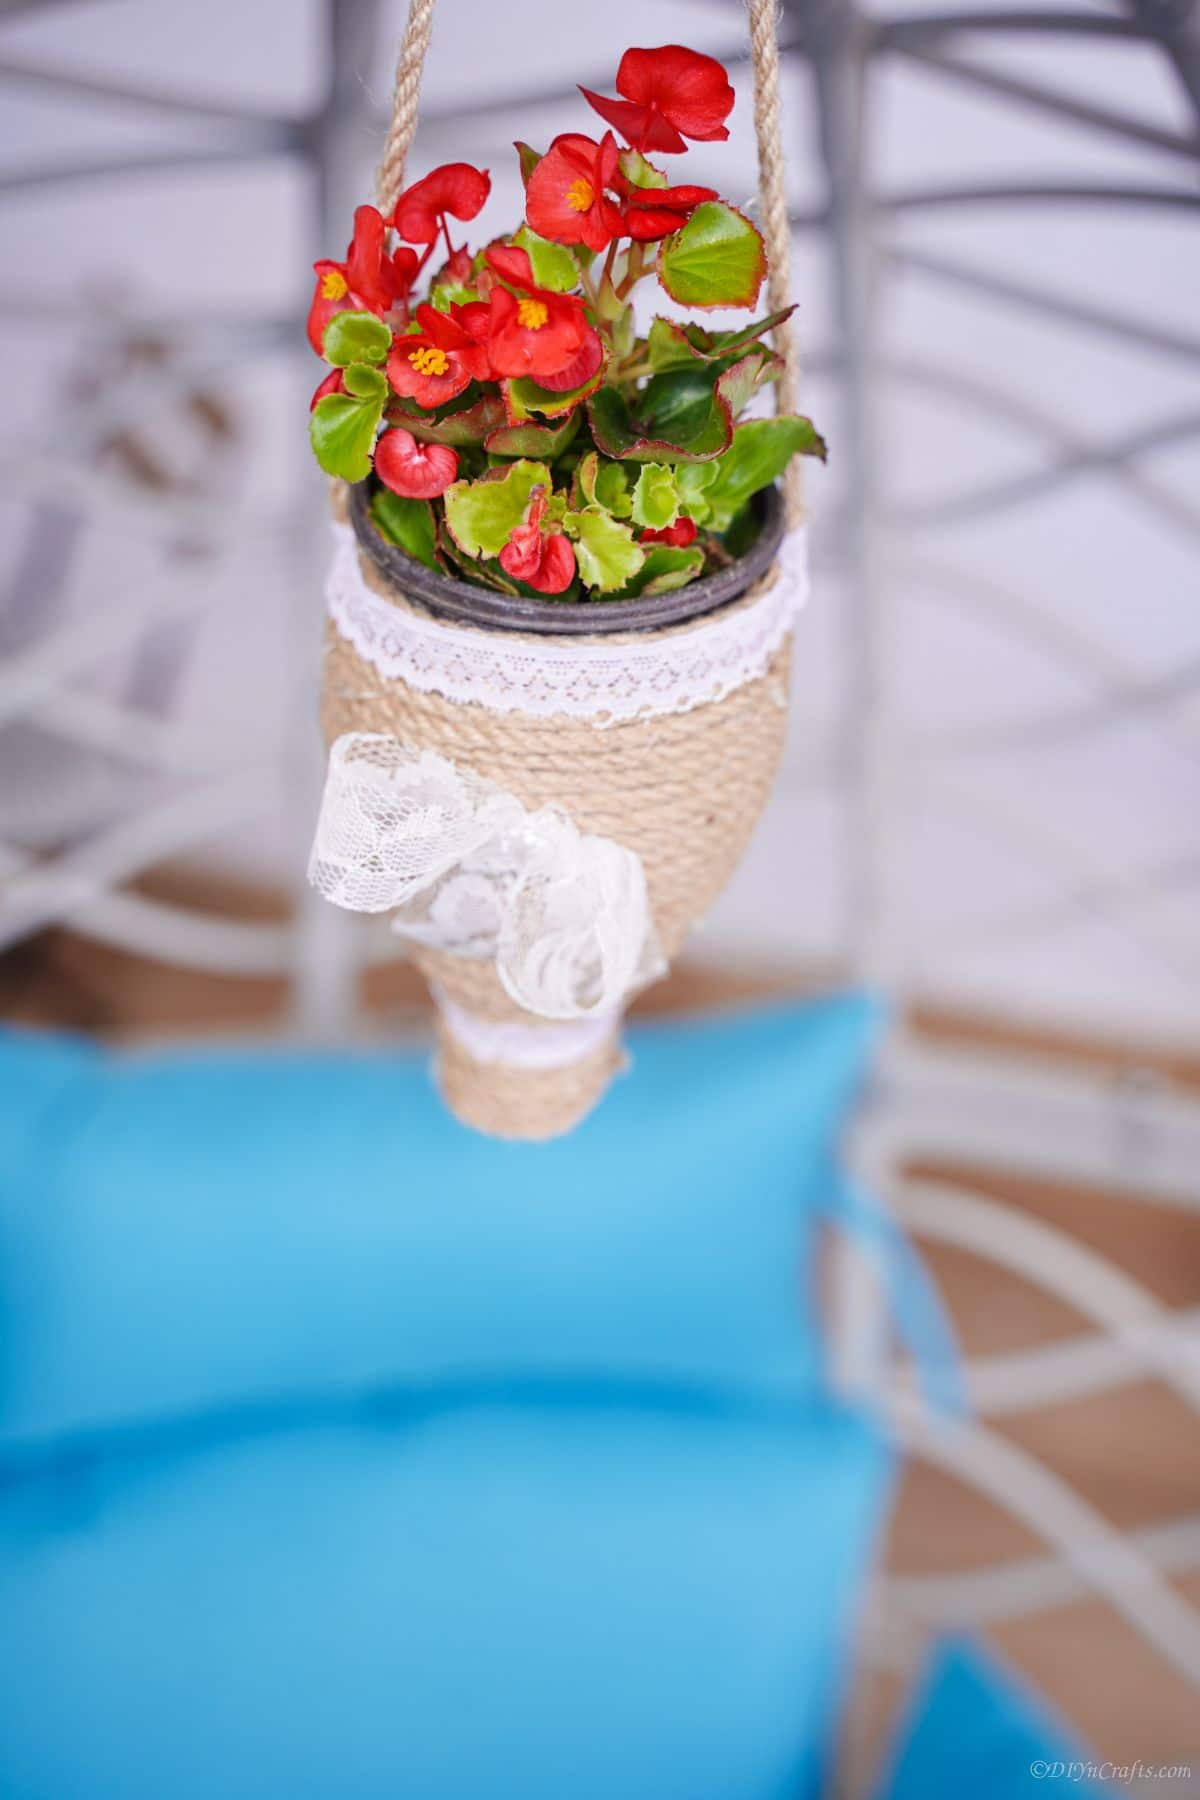 flowers in planter hanging above white wicker chair with blue cushion